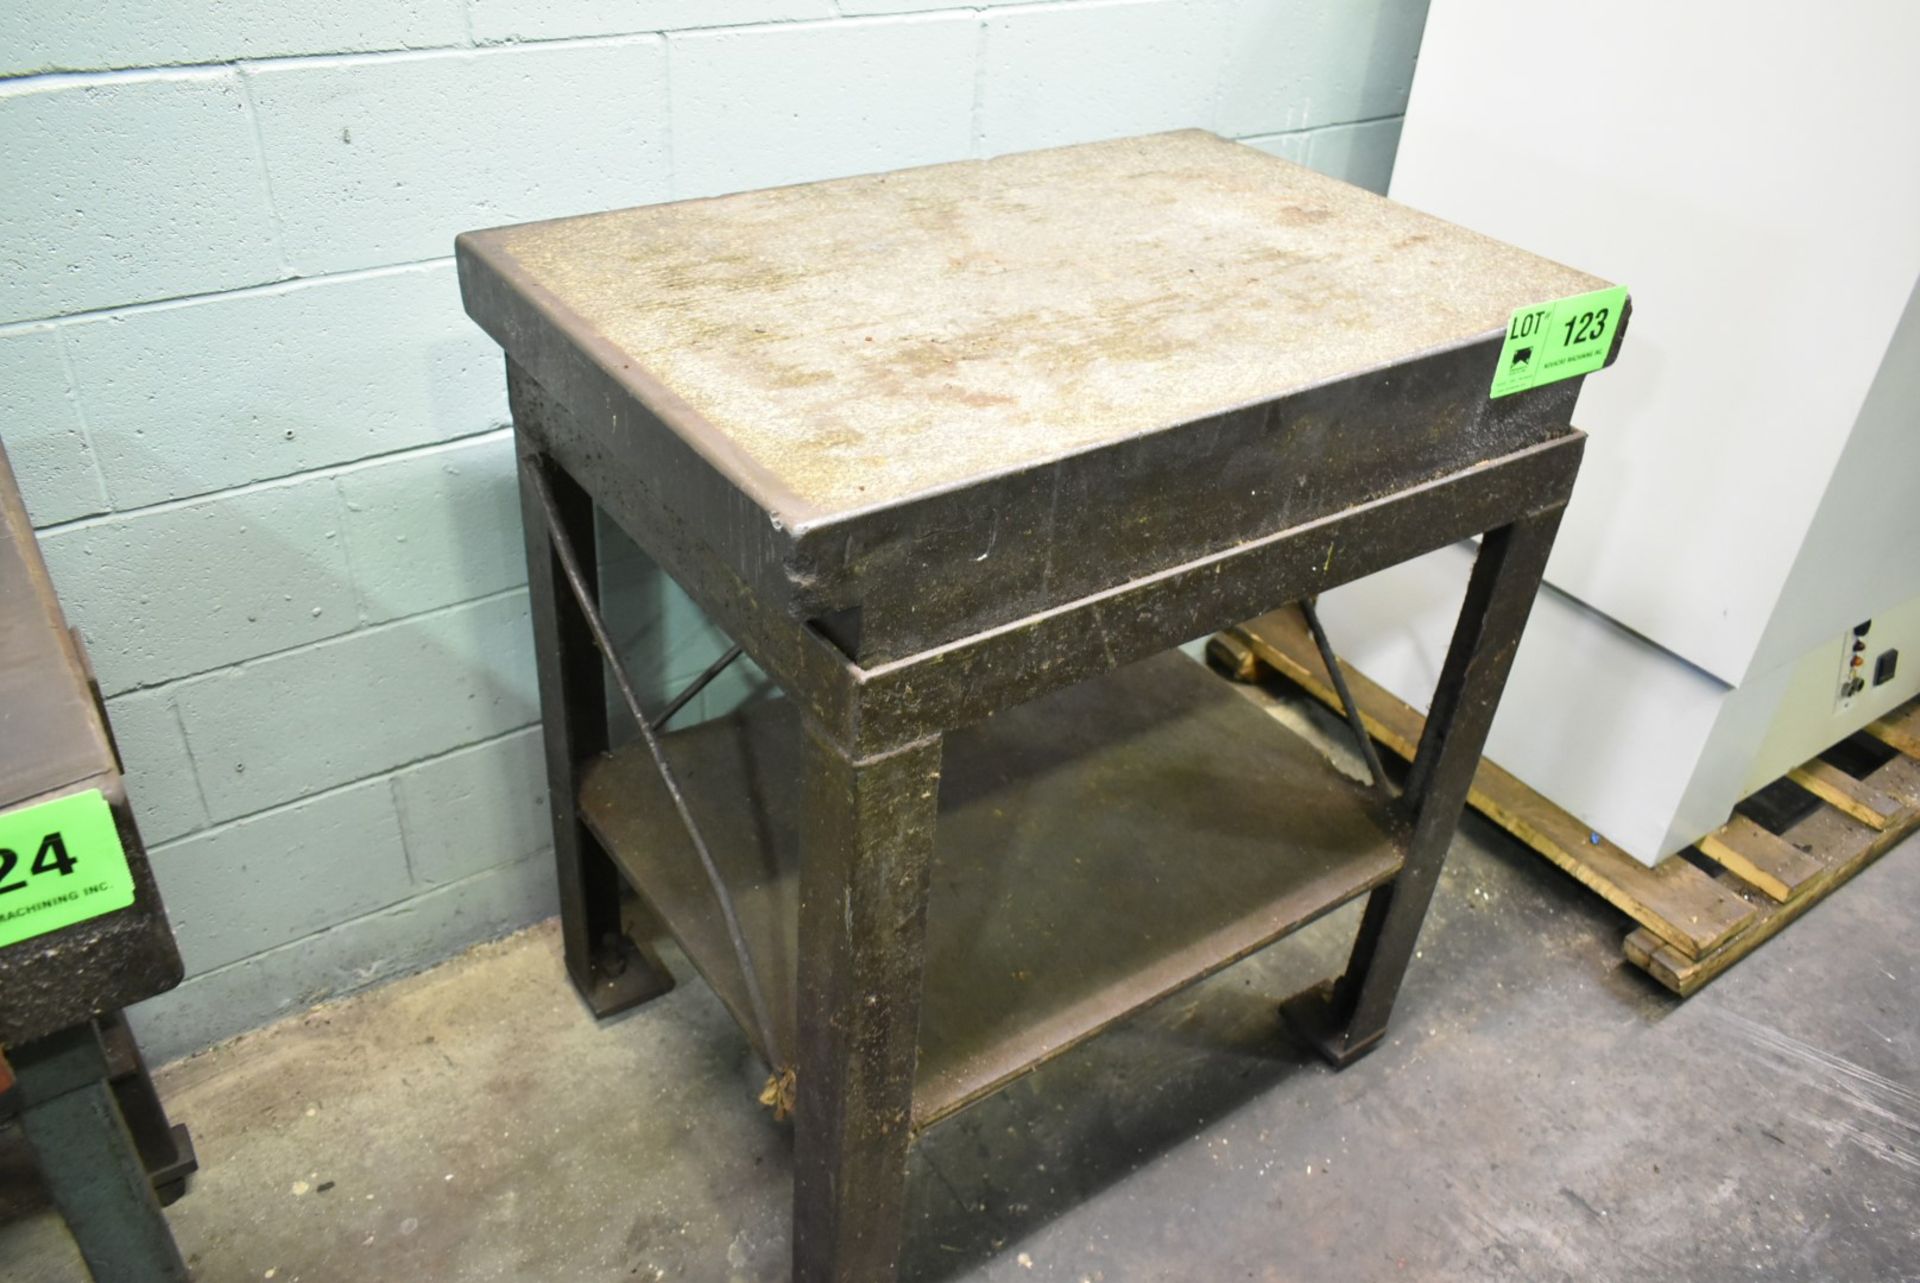 36" X 24" X 8" GRANITE SURFACE PLATE WITH STAND [RIGGING FEE FOR LOT#123 - $25 USD PLUS APPLICABLE